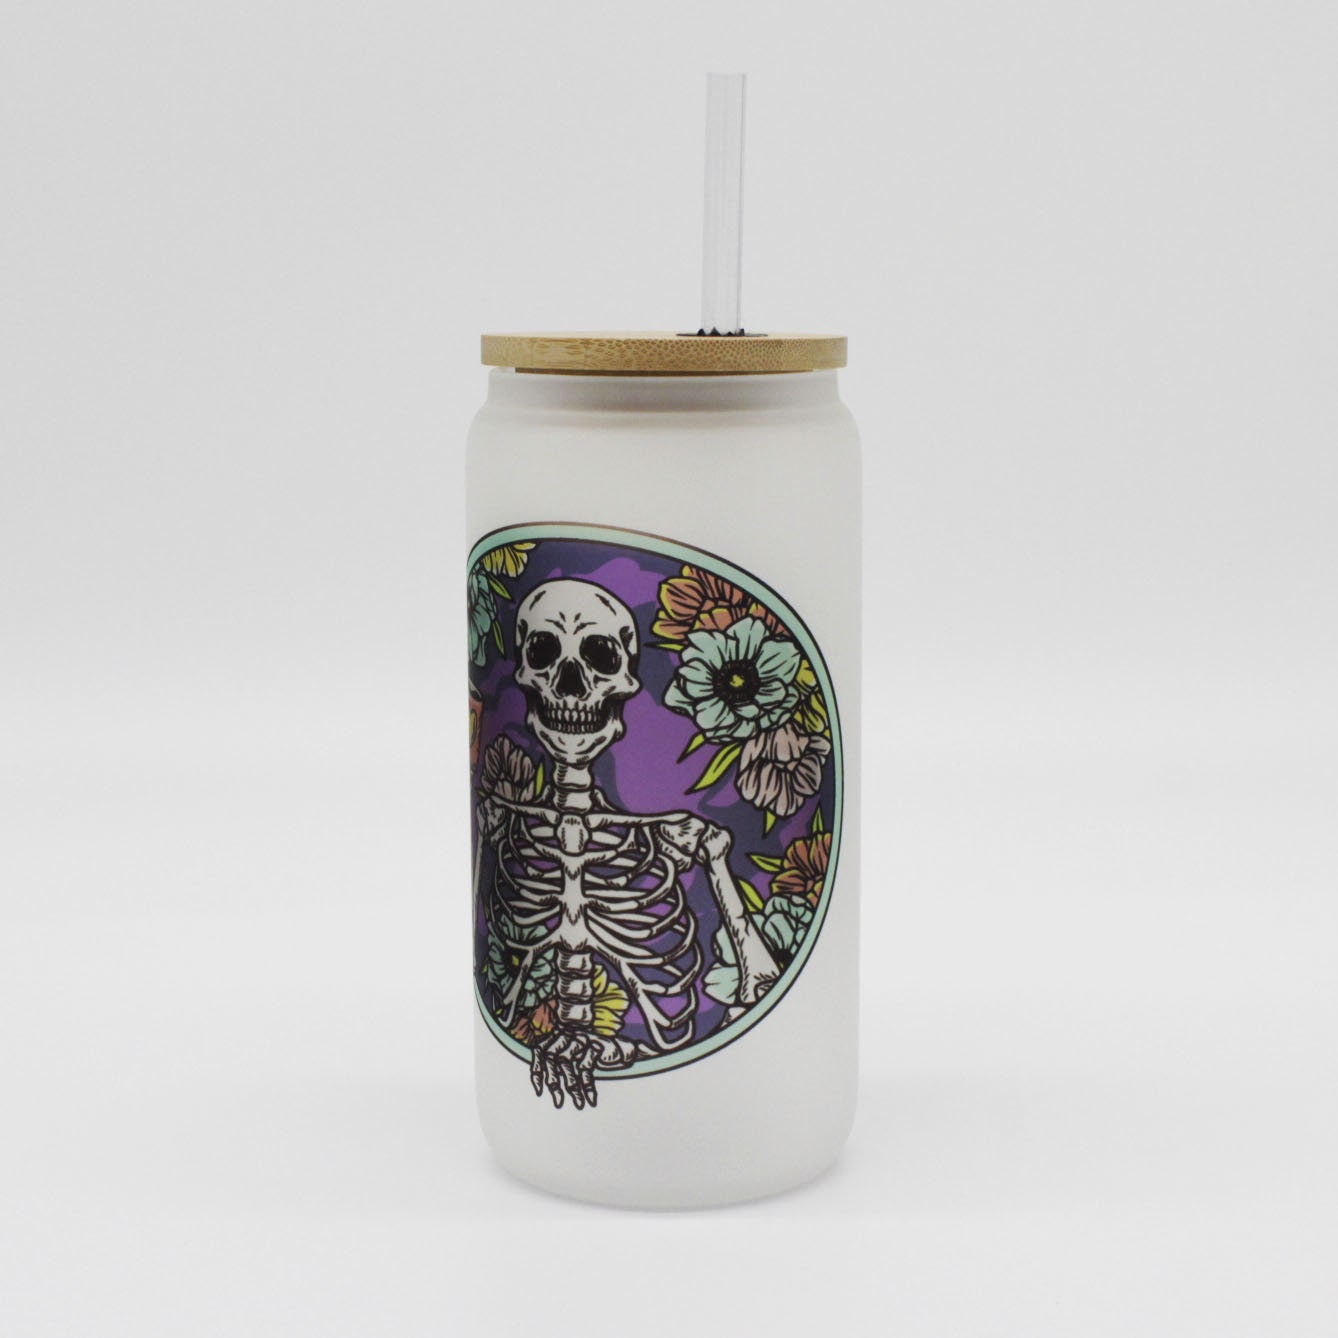 Dead Without Coffee Frosted Glass Cup